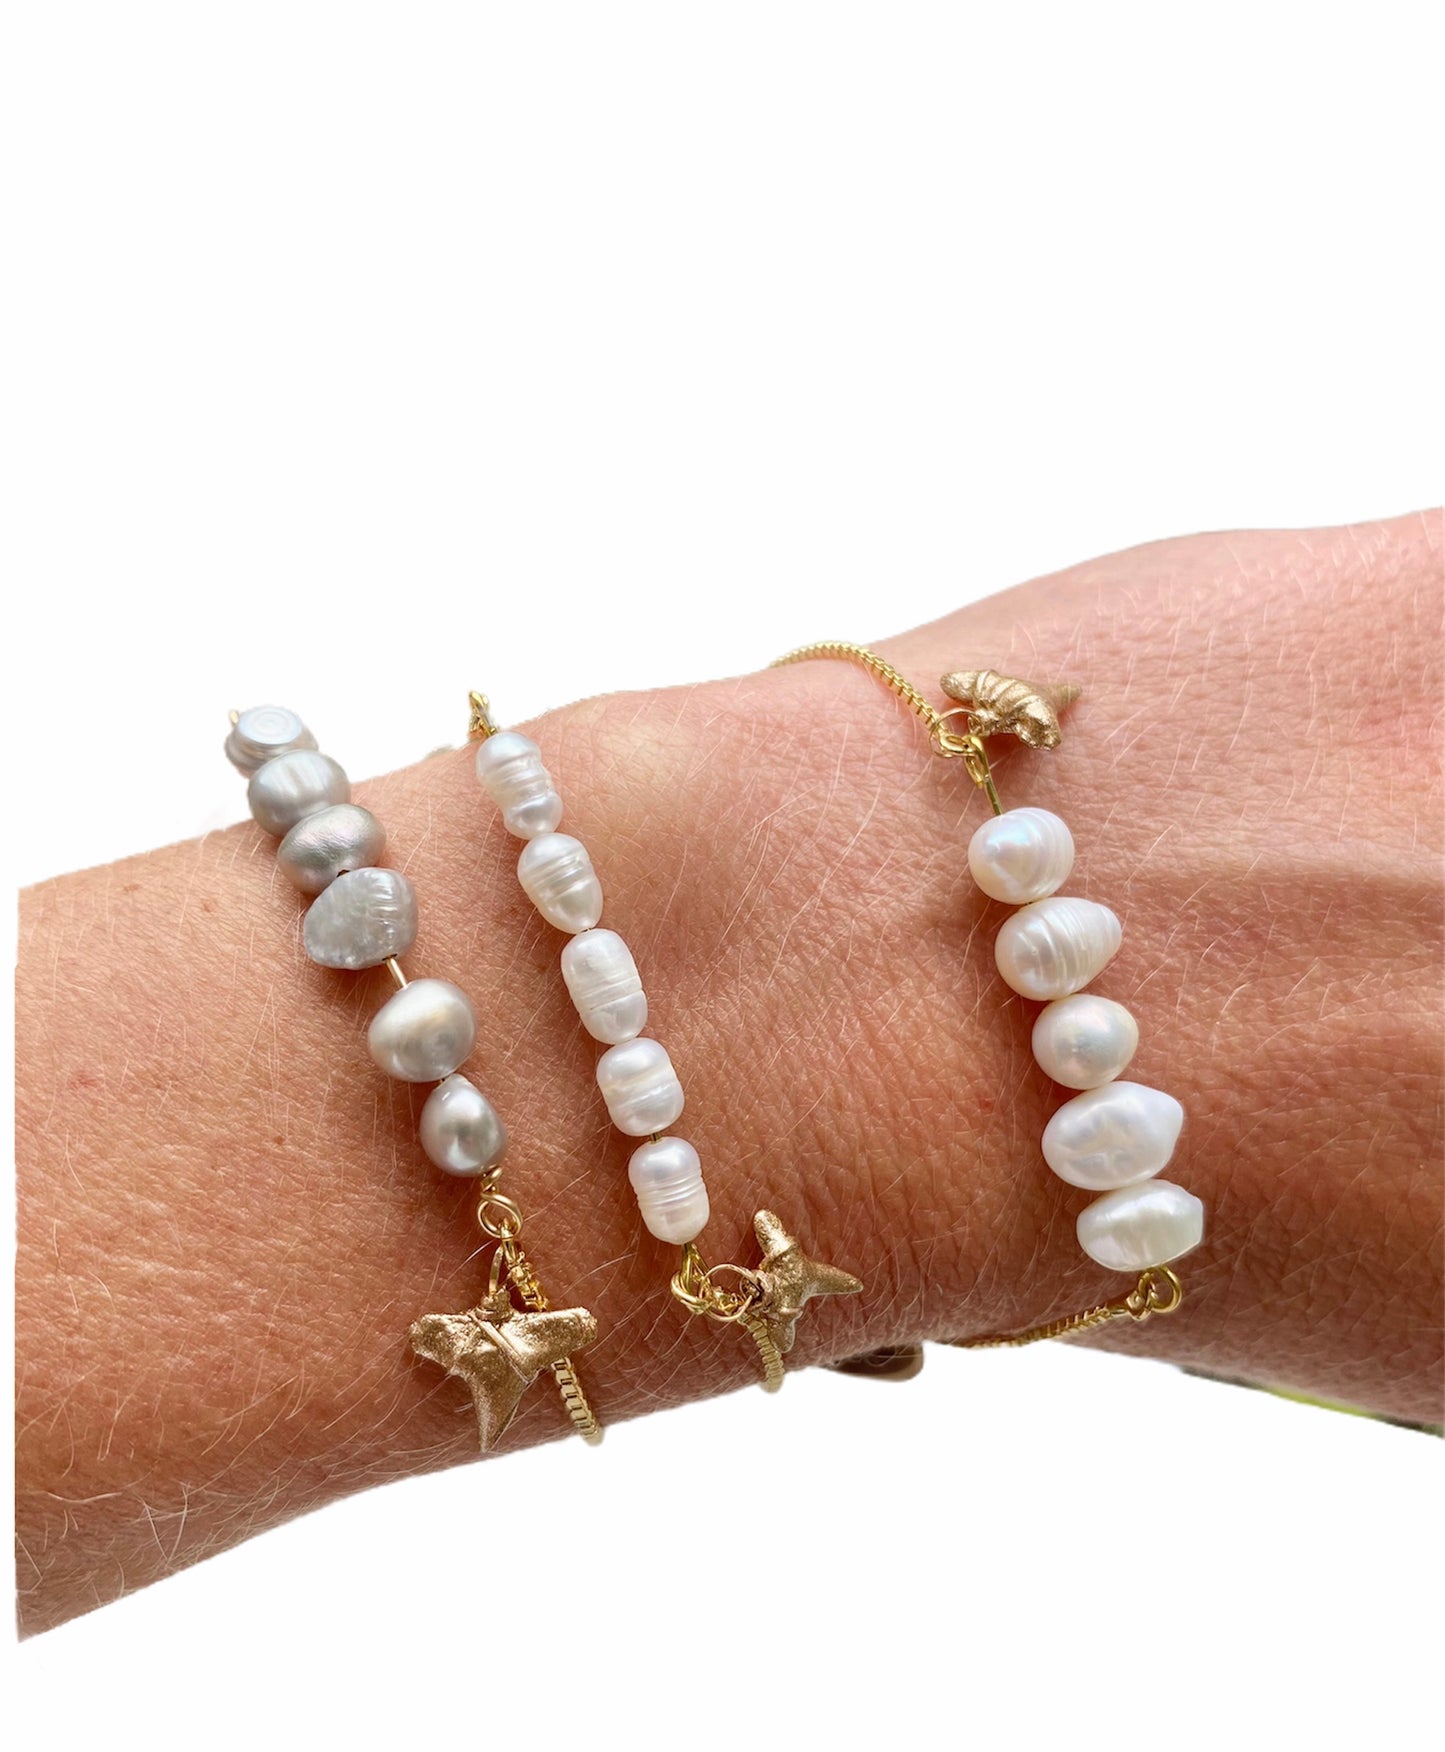 gold shark tooth charm and pearl bracelets-group photo modeled on wrist-foxy fossils